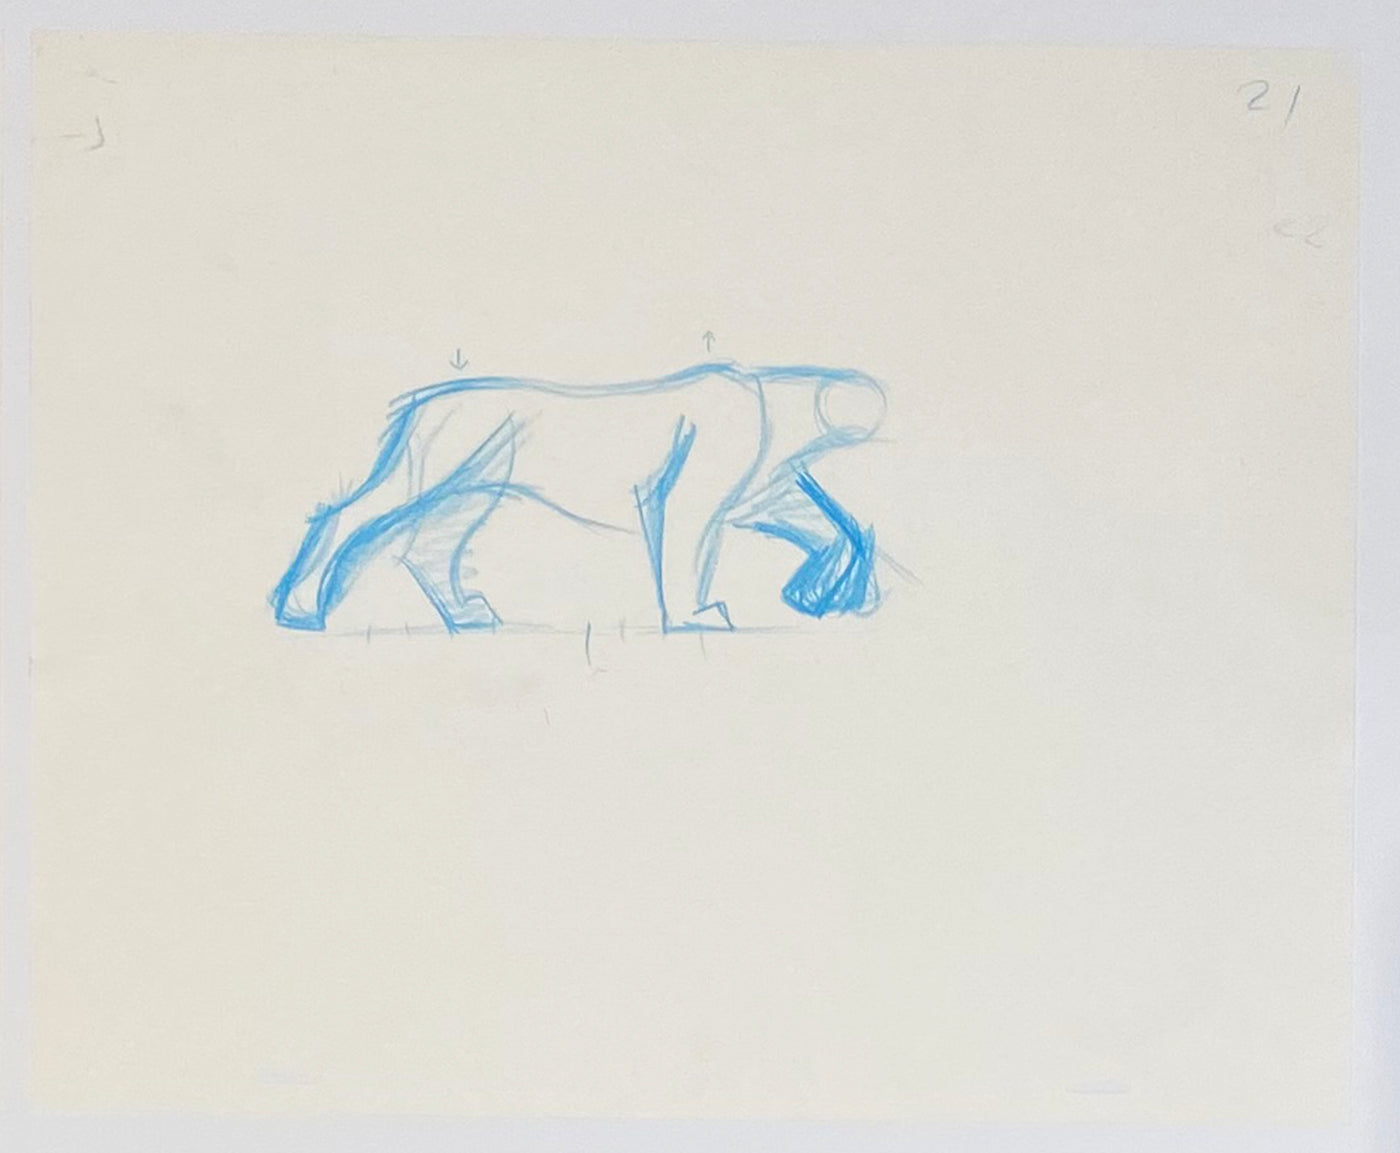 Original Walt Disney Sequence of 2 Production Drawings from The Lion King